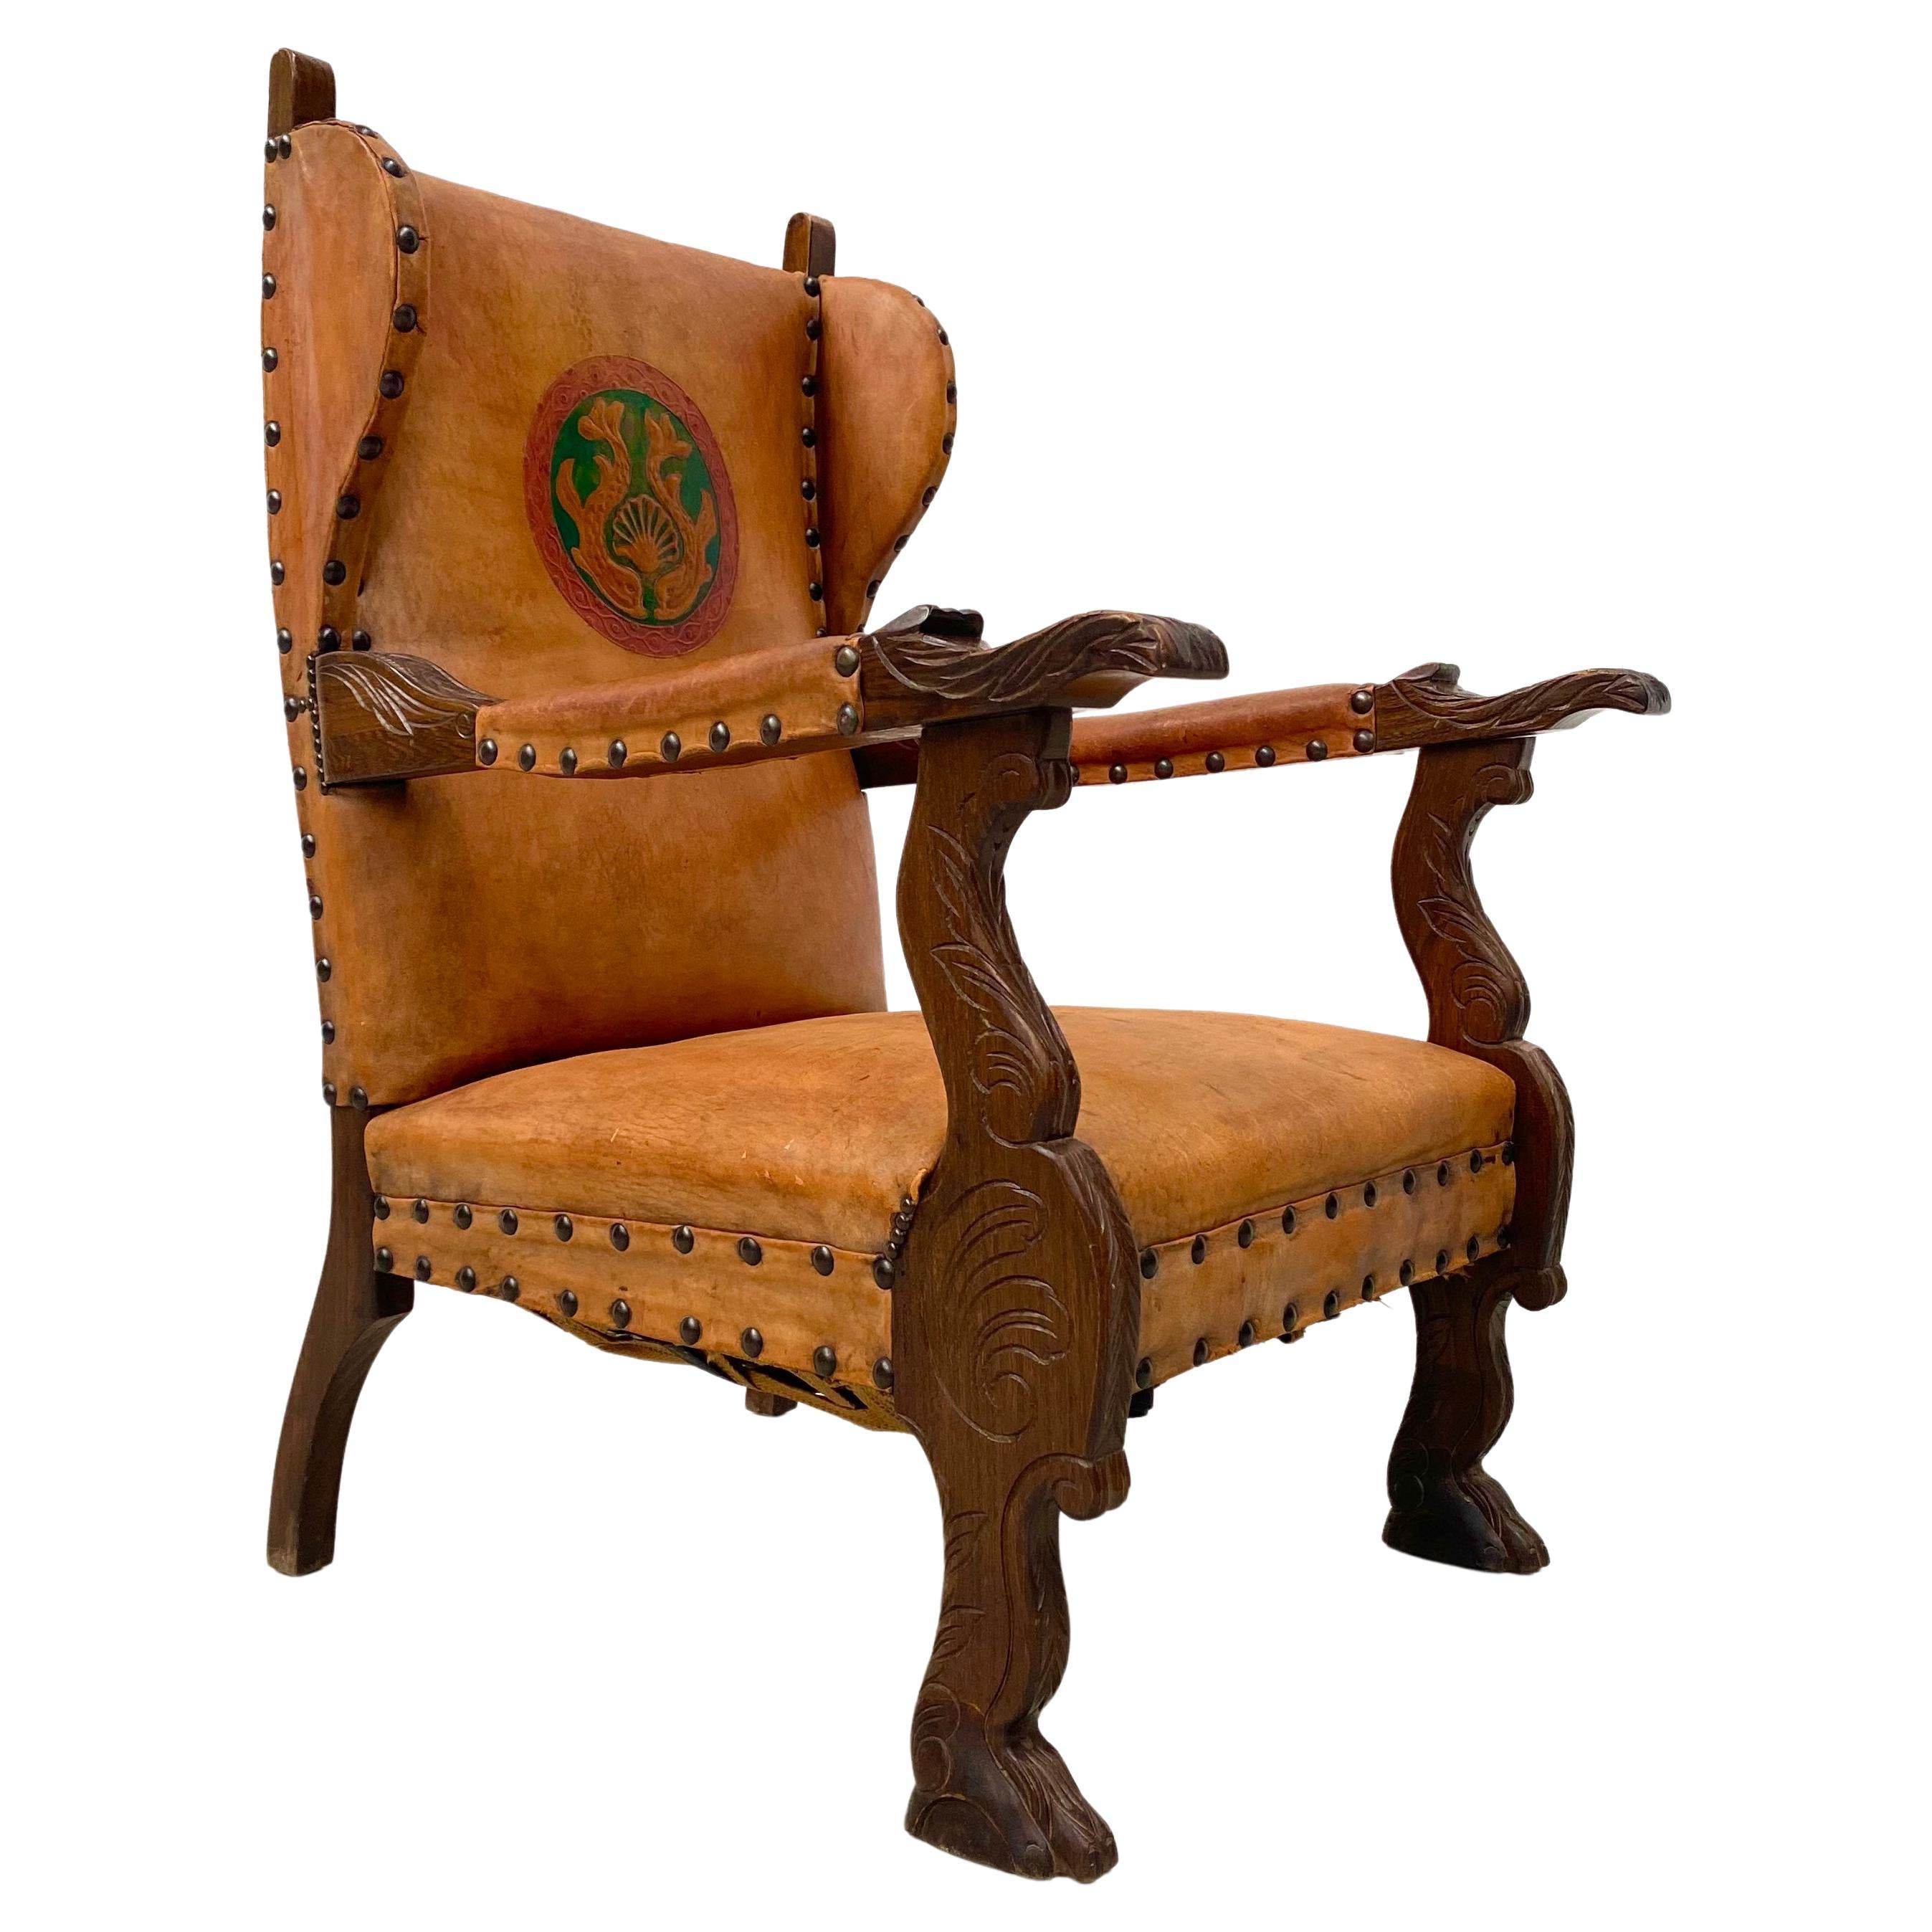 Antique French Wingchair in Cognac Leather with Carvings, 1920s.